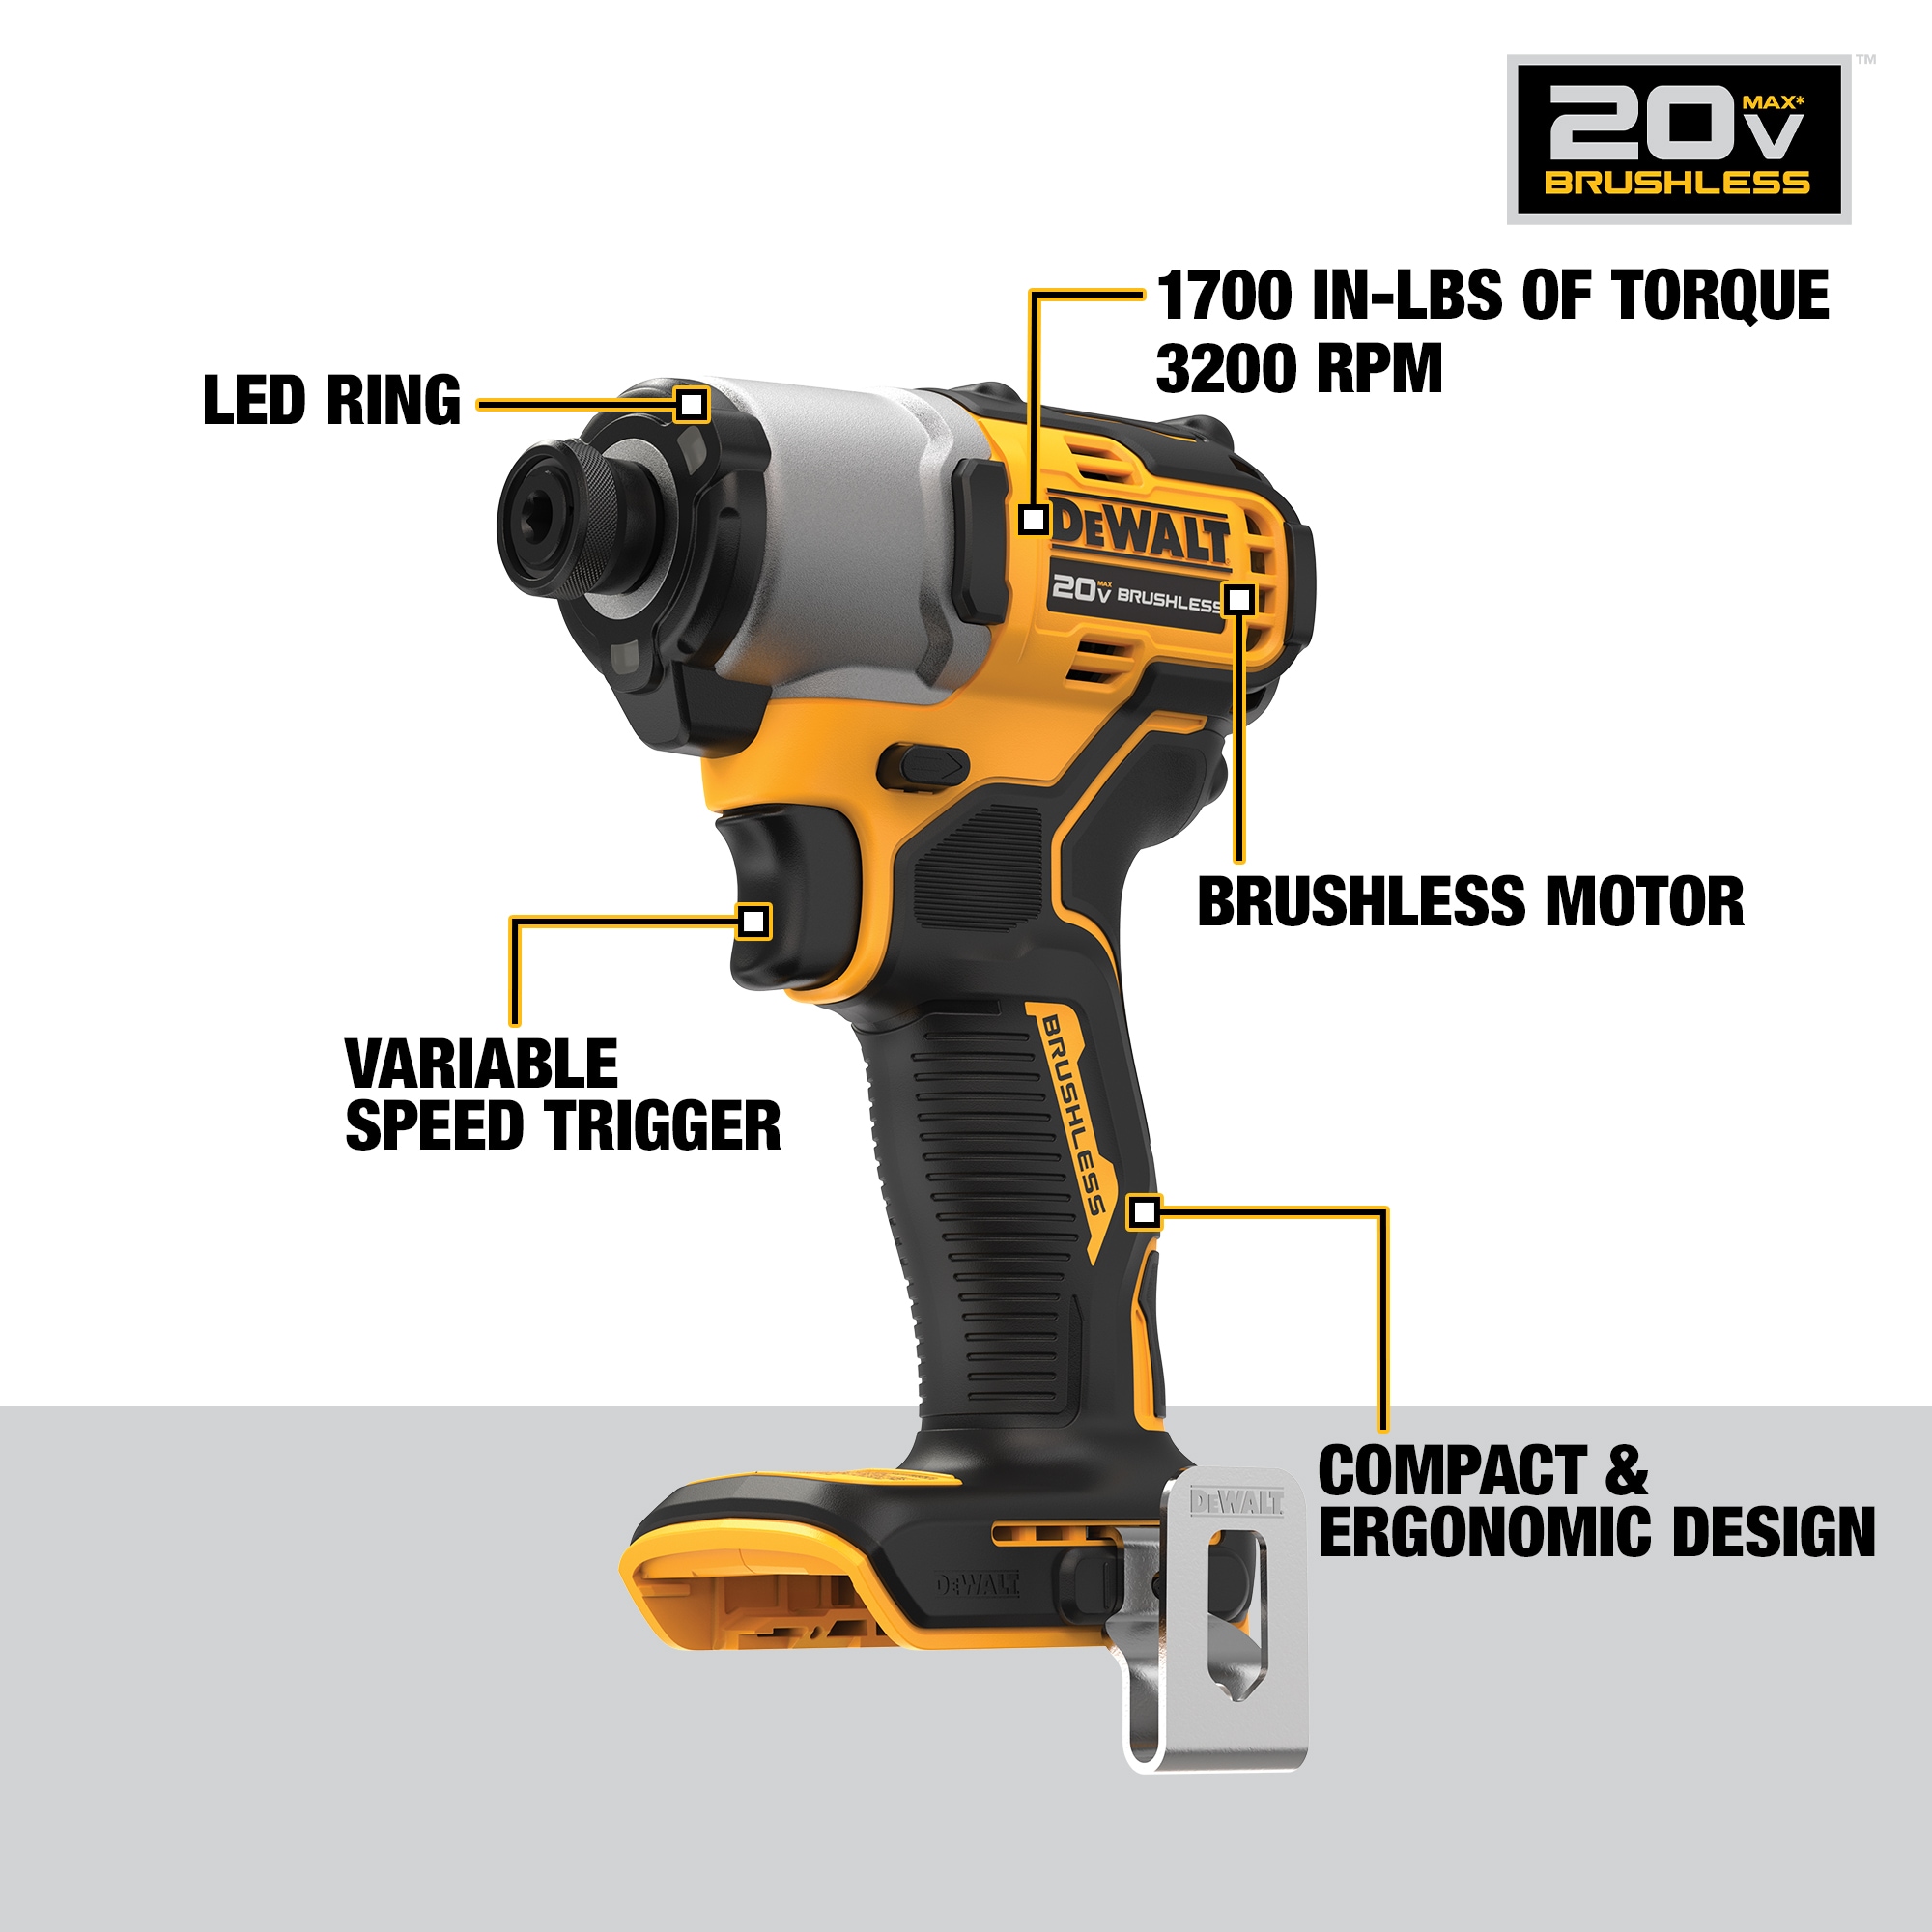 DEWALT 20V MAX Compact Cordless Jobsite Blower (Tool Only) - Power